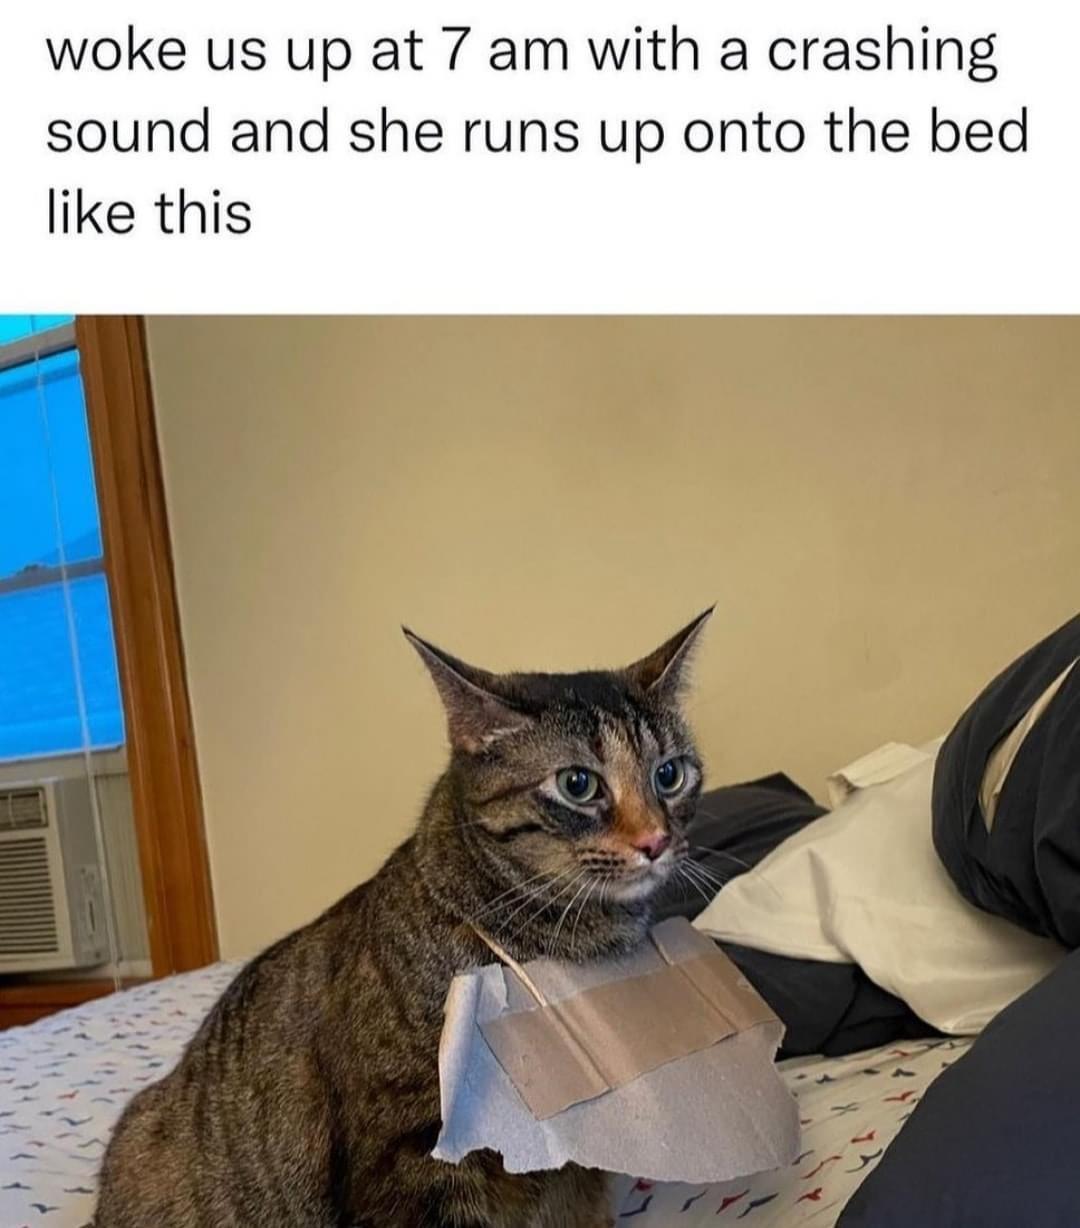 dank memes - funny memes - cat - woke us up at 7 am with a crashing sound and she runs up onto the bed this